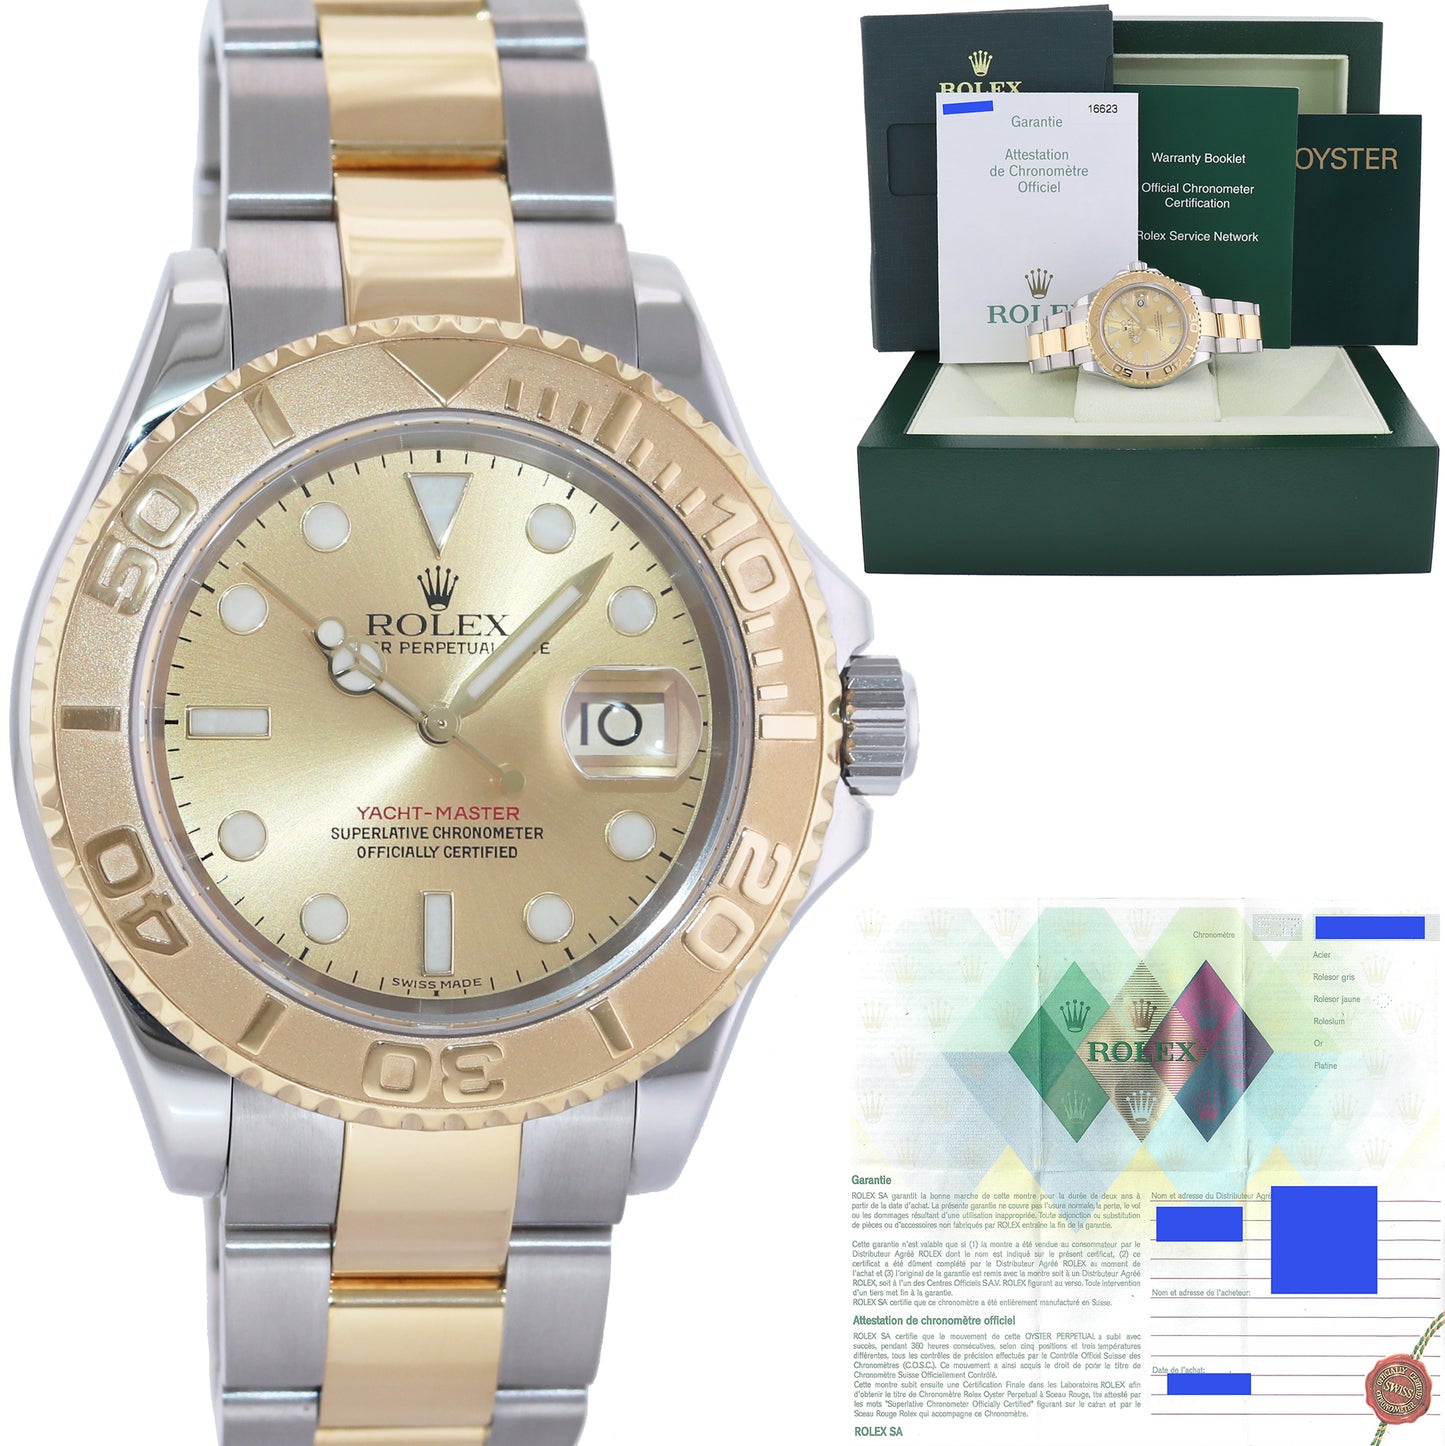 PAPERS MINT 2006 Rolex 16623 Two Tone Yellow Gold Yachtmaster Champagne Watch